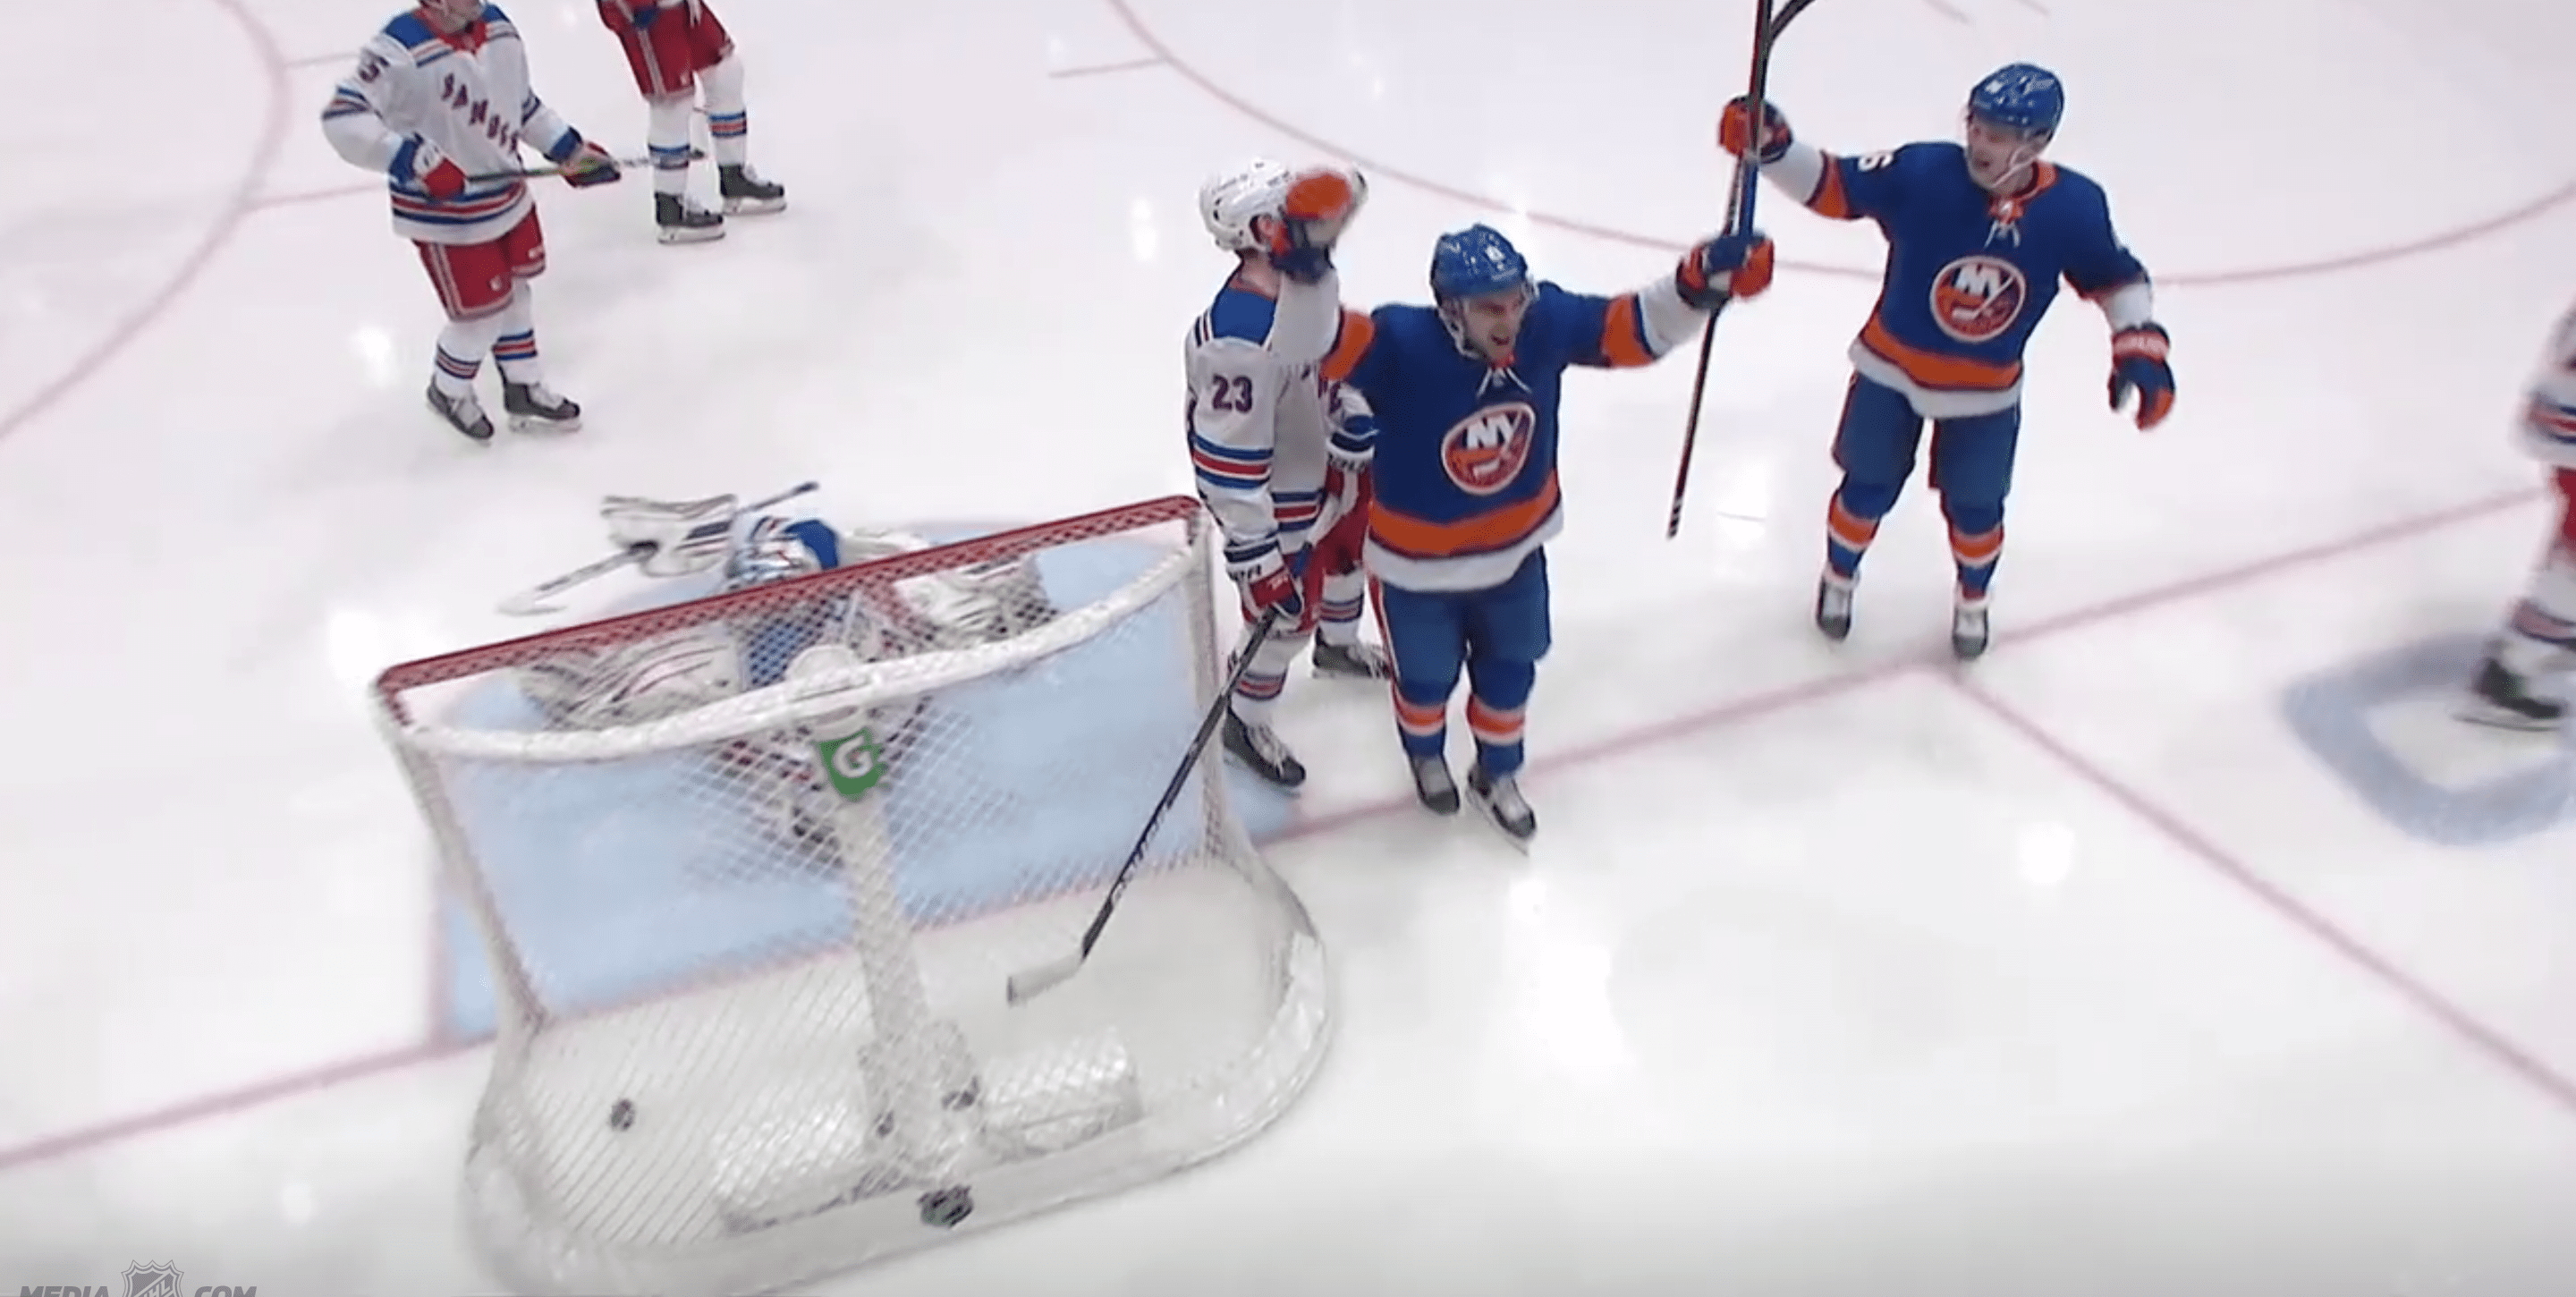 Kyle Palmieri scores his first goal as a member of the New York Islanders